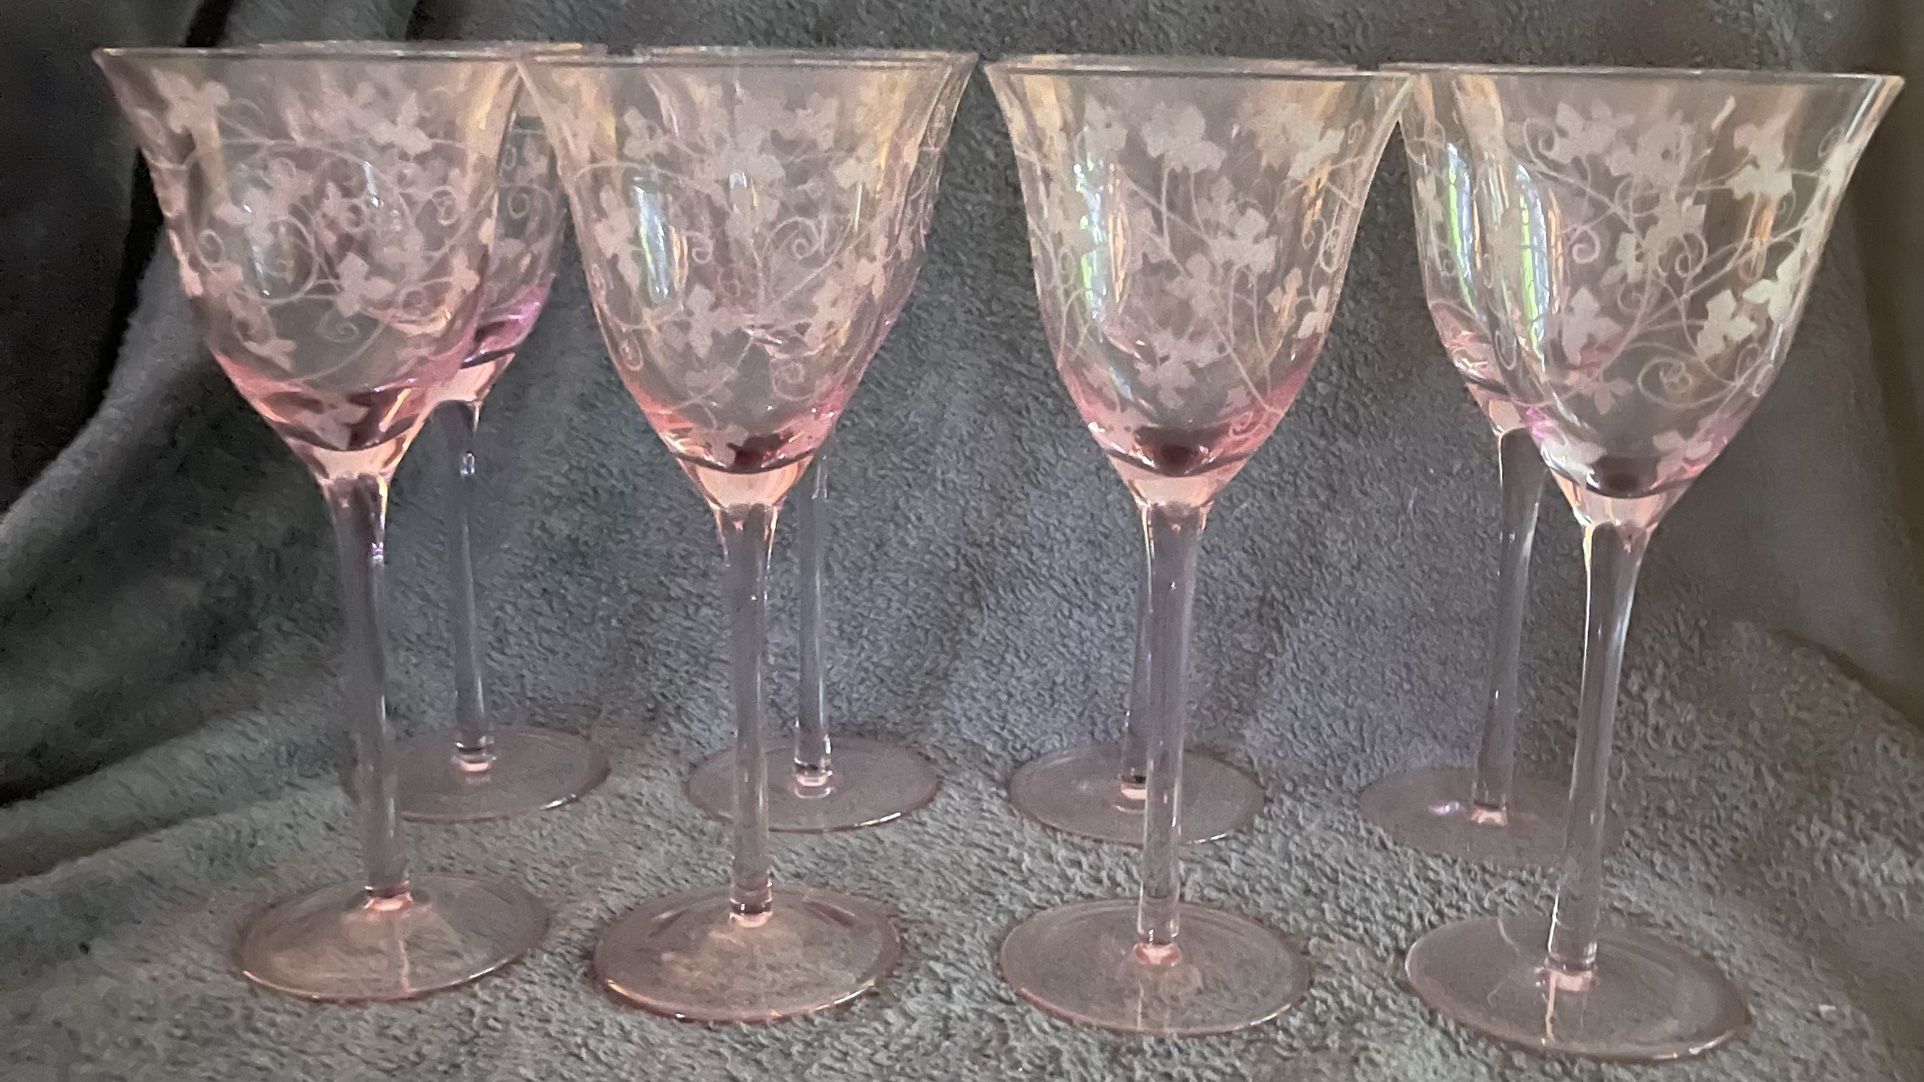 Vintage Pink Wine Glasses With An Etched Ivy Motif Set of 8.